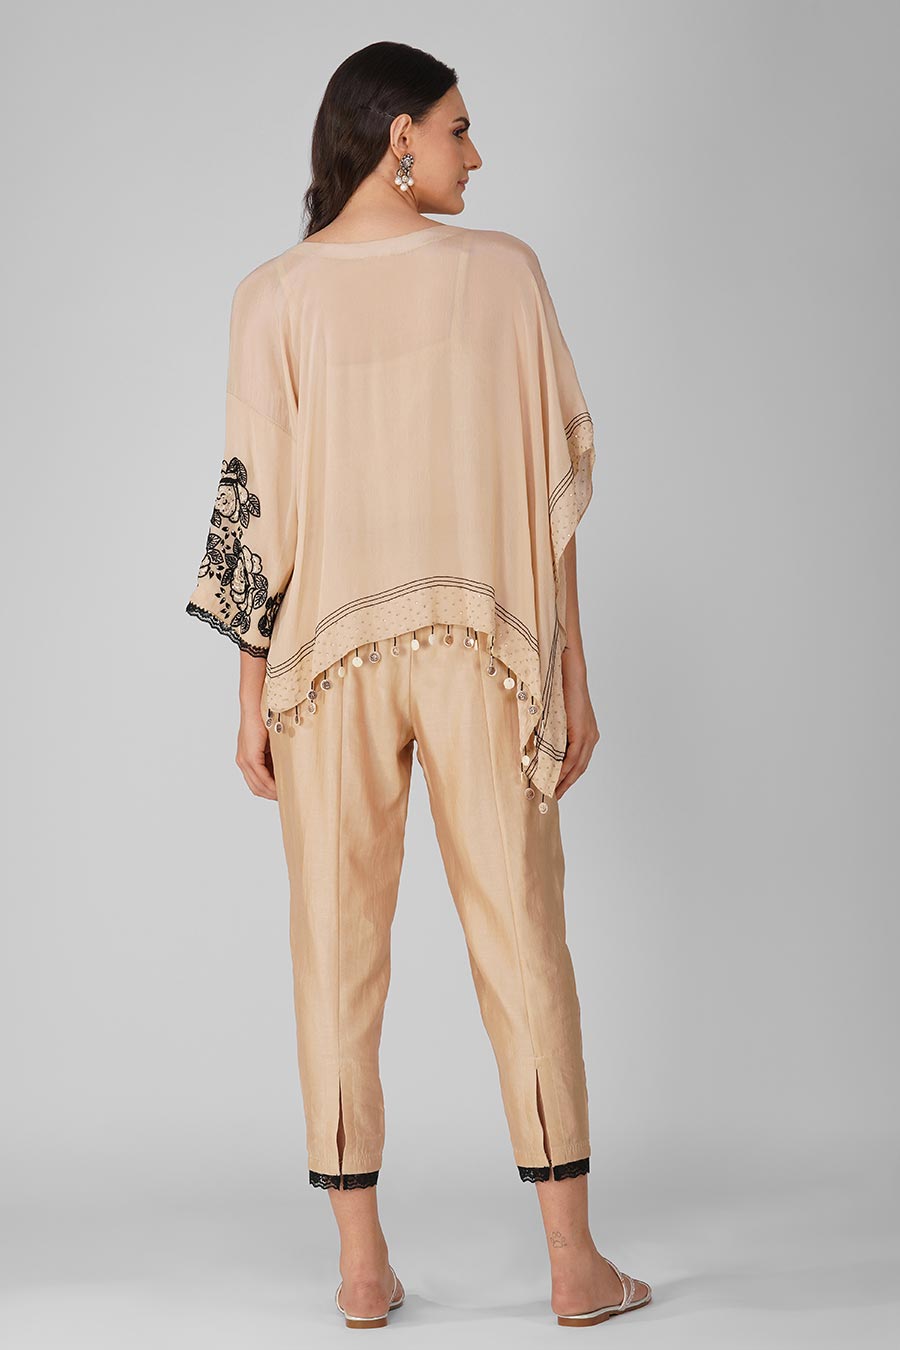 Beige Embroidered Asymmetric Cape Set